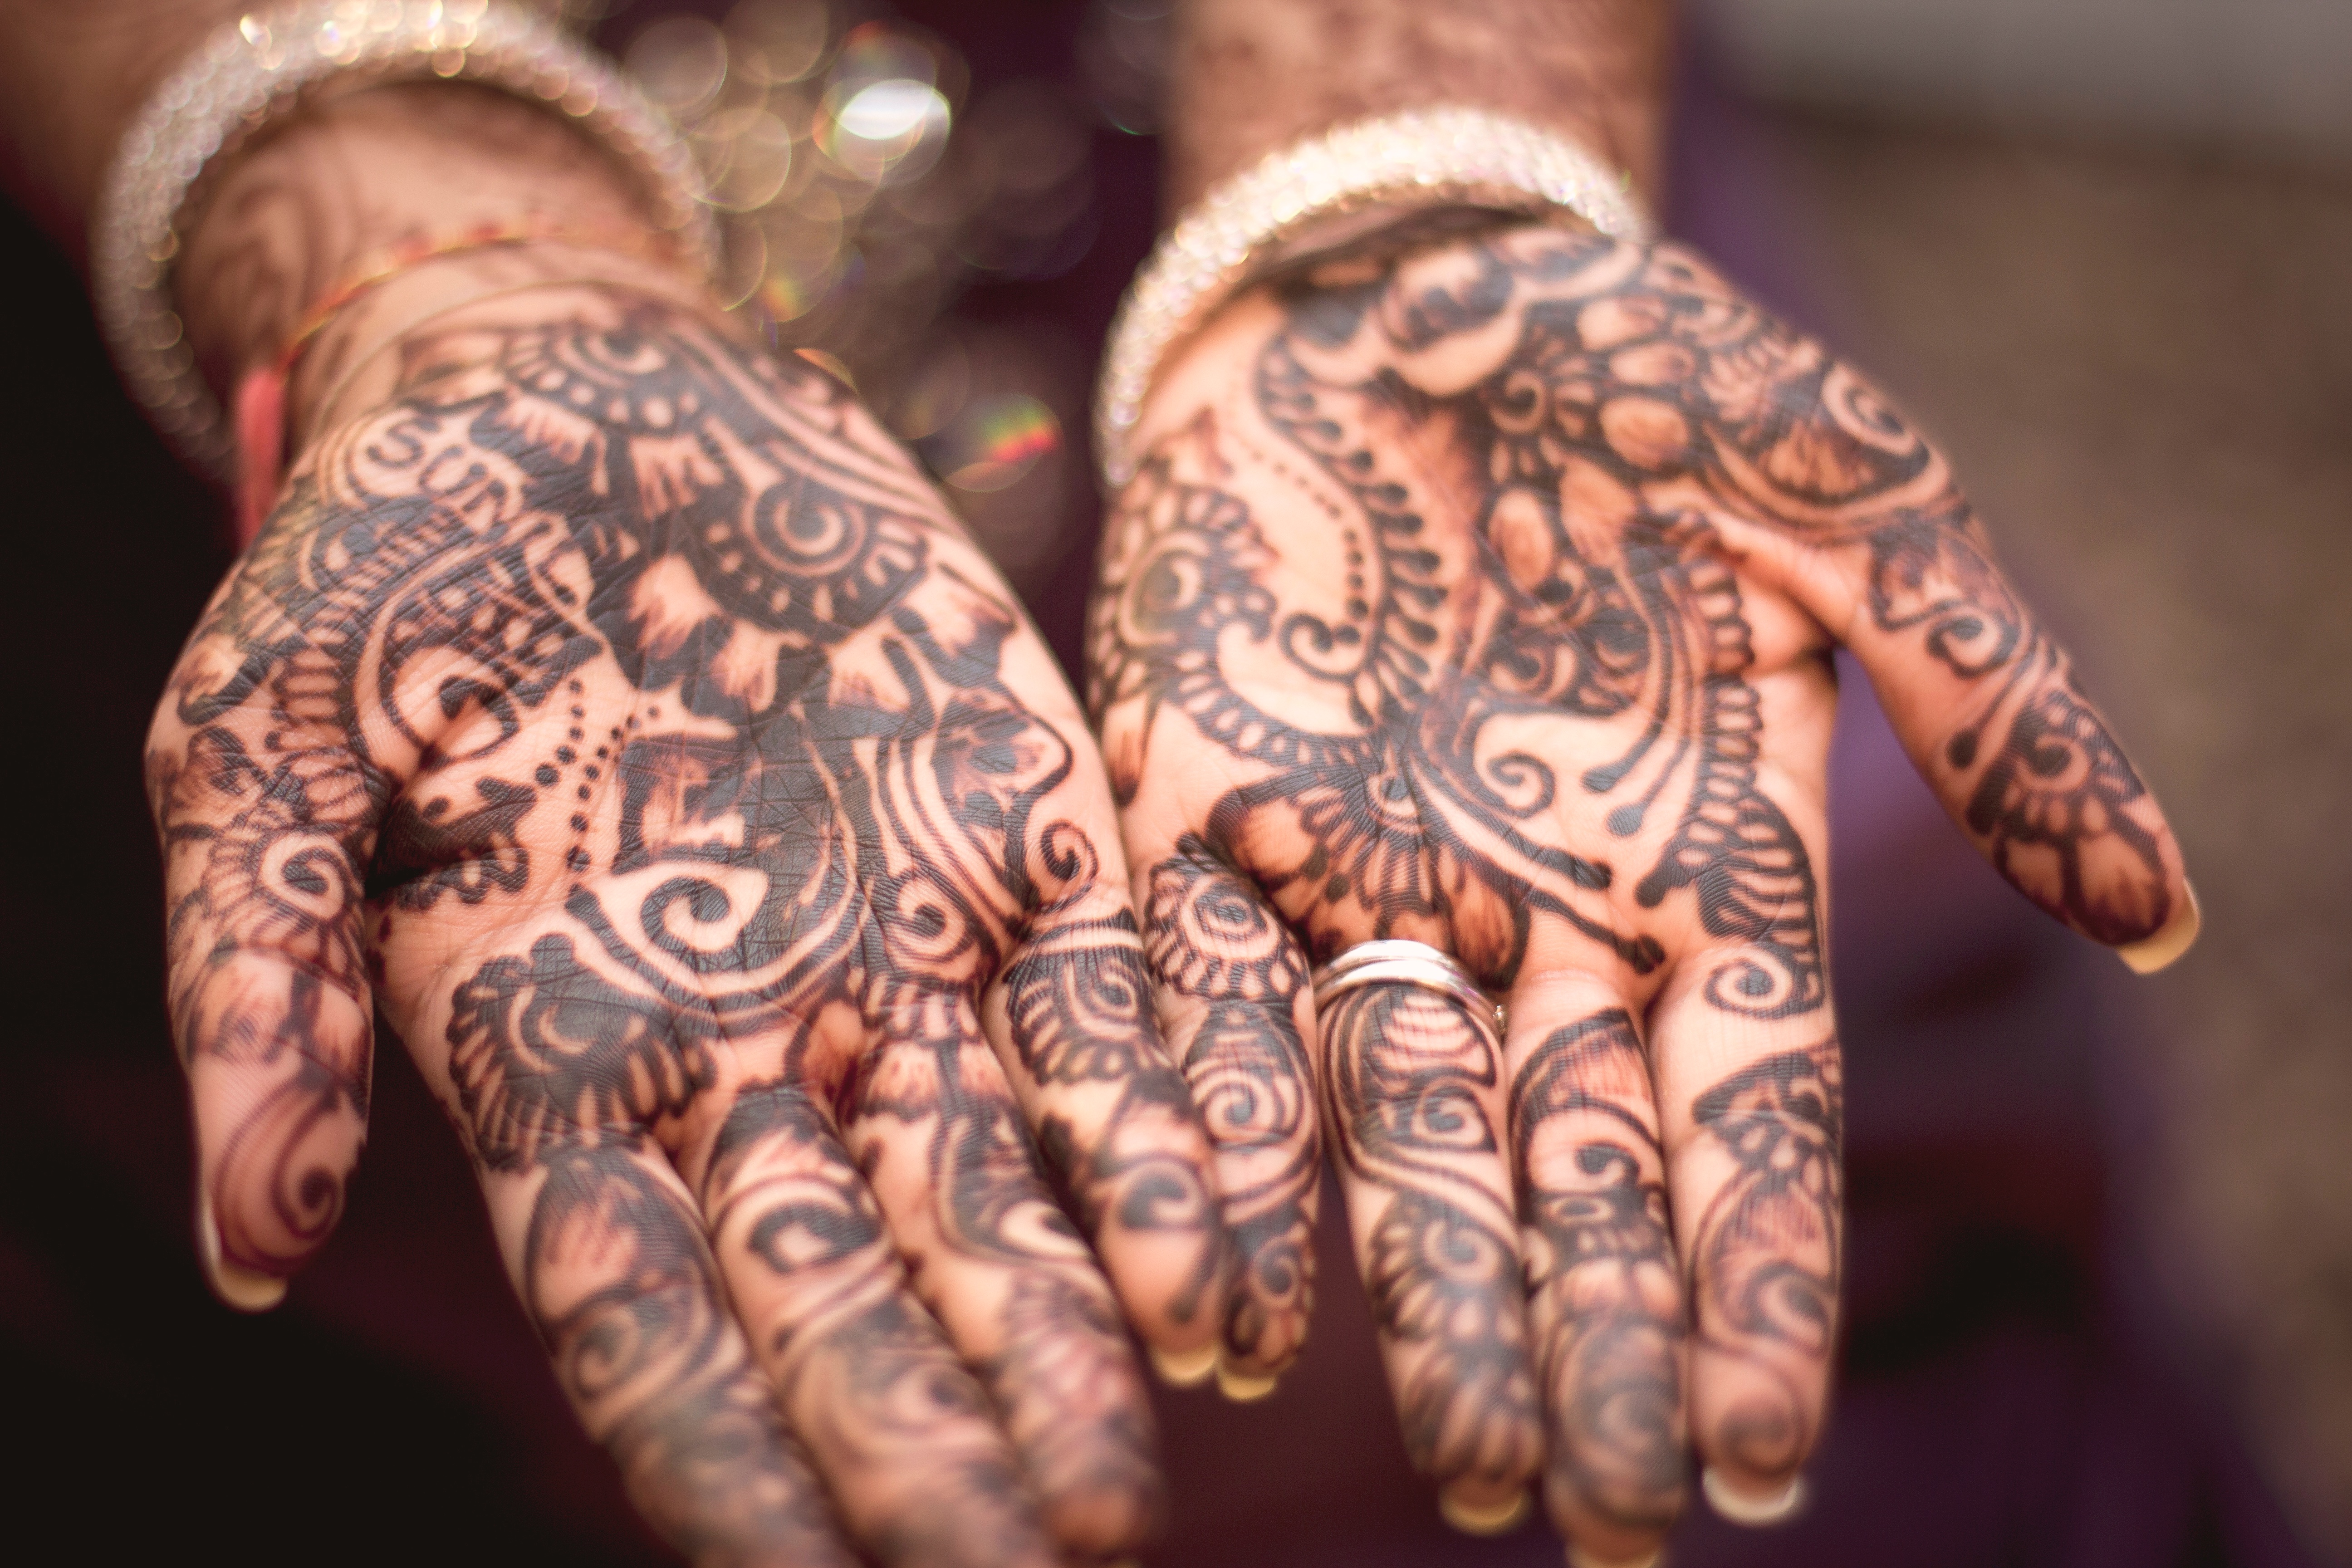 Henna: The Temporary Tattoos From Centuries Ago - Pioneer Cash & Carry